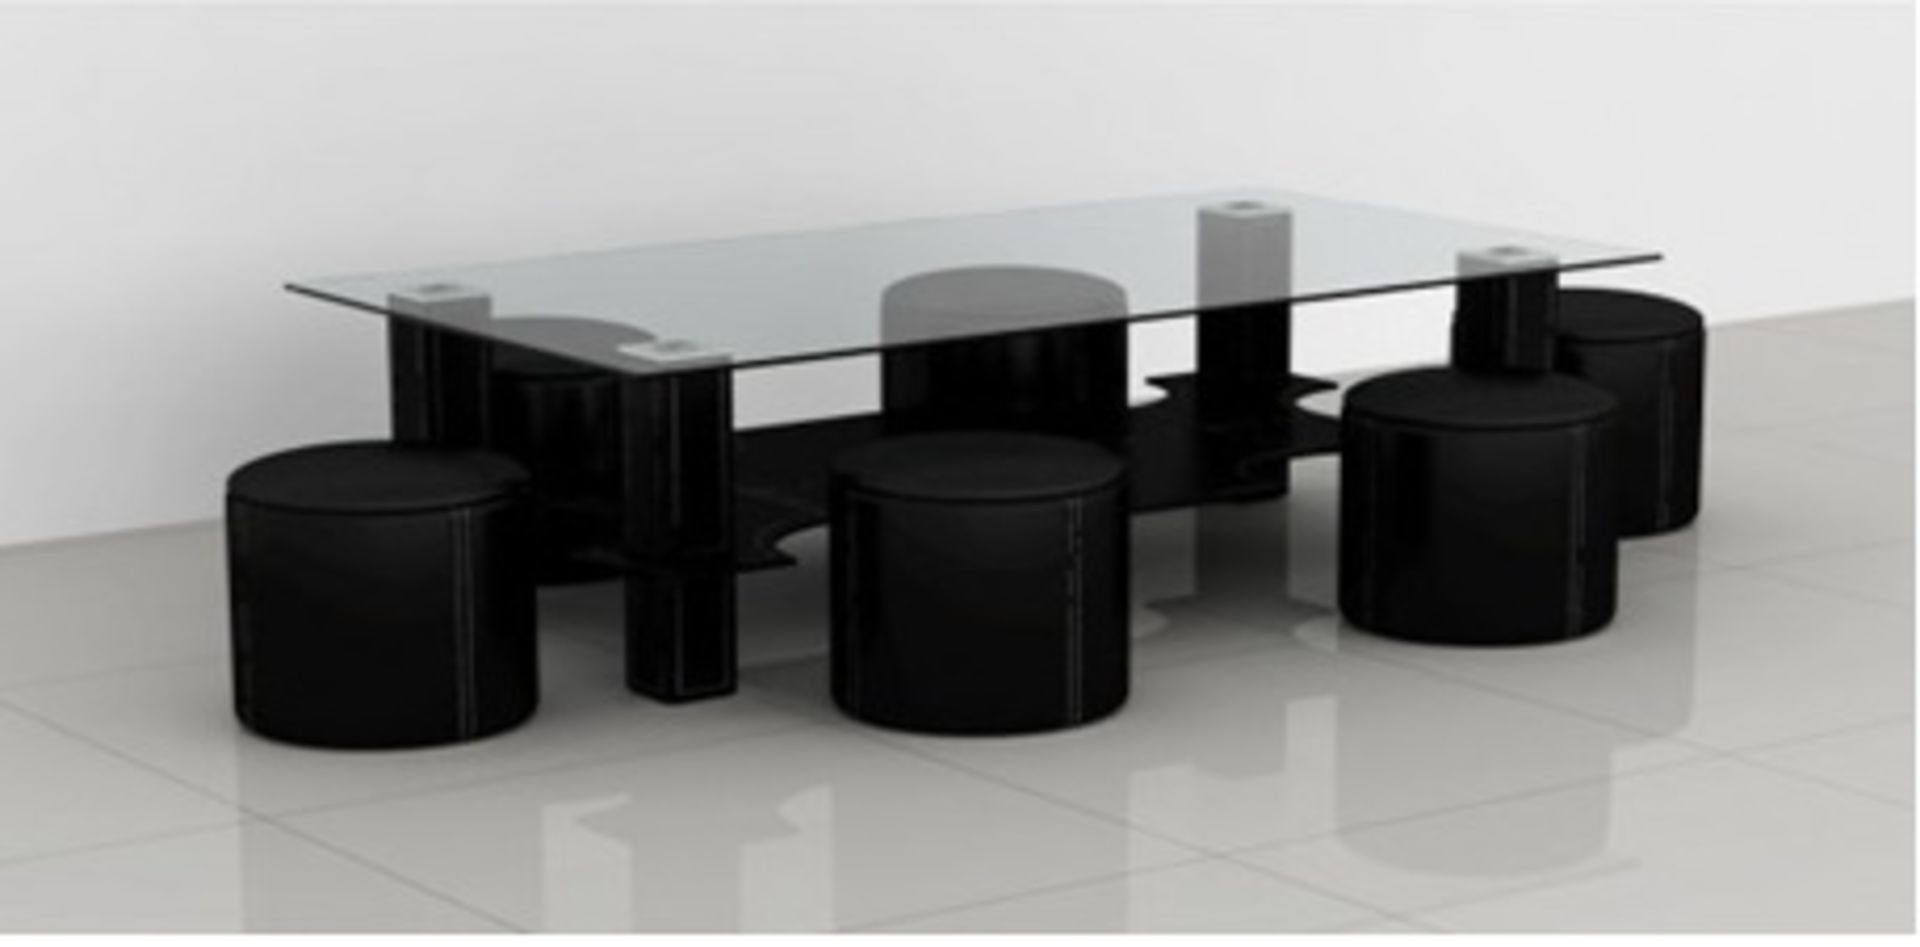 1 x Premium Glass Coffee Table and Stool Set CTB423 Black - (Brand New & Boxed)